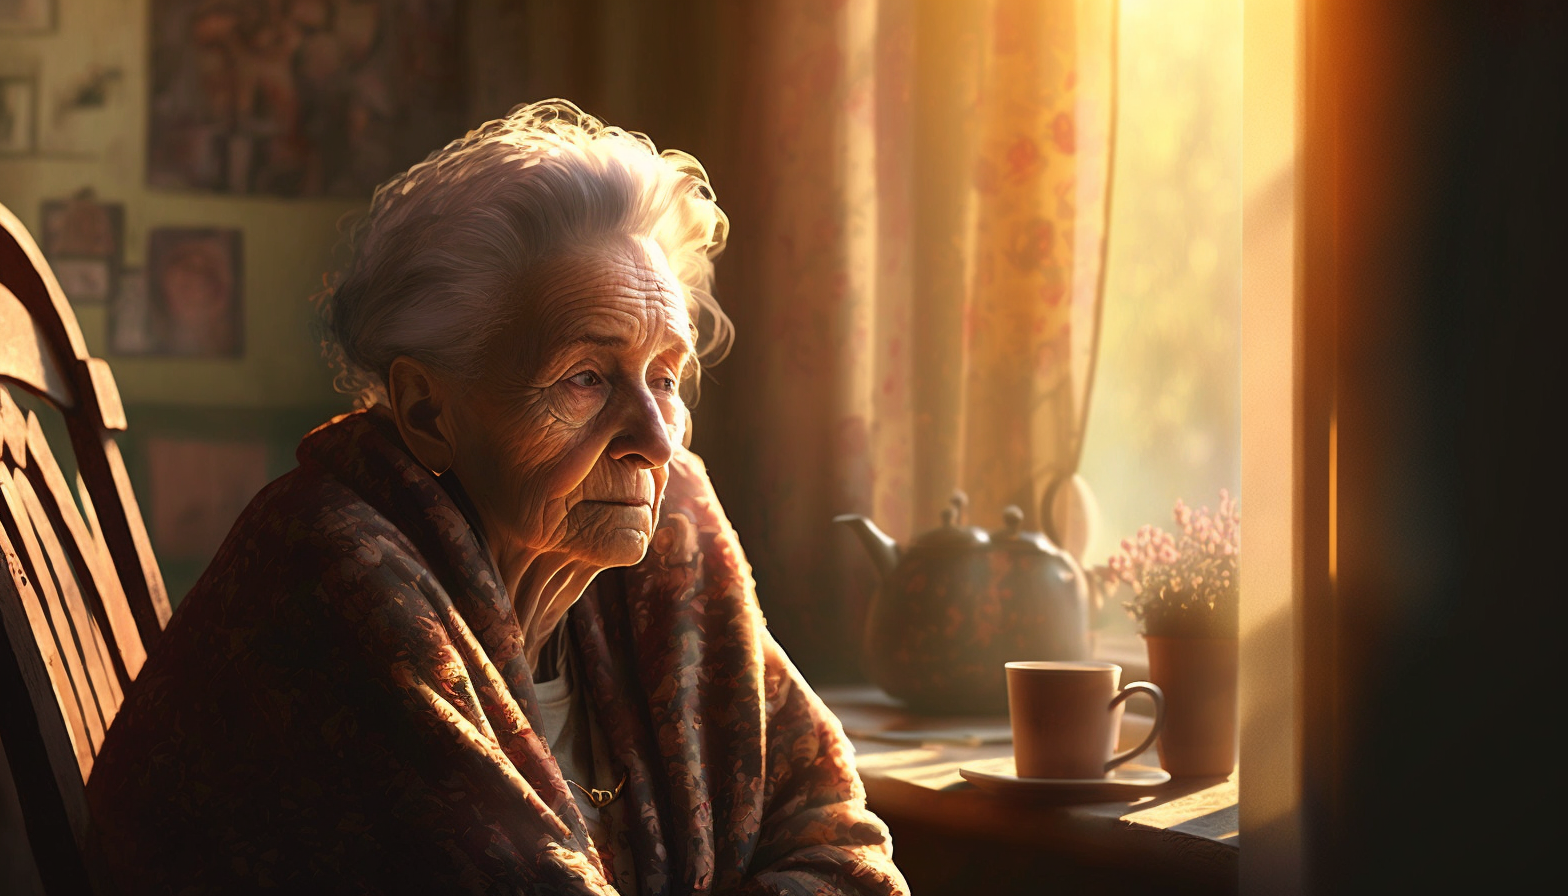 A photograph of an elderly woman with hypothyroidism sitting in a sunlit room.